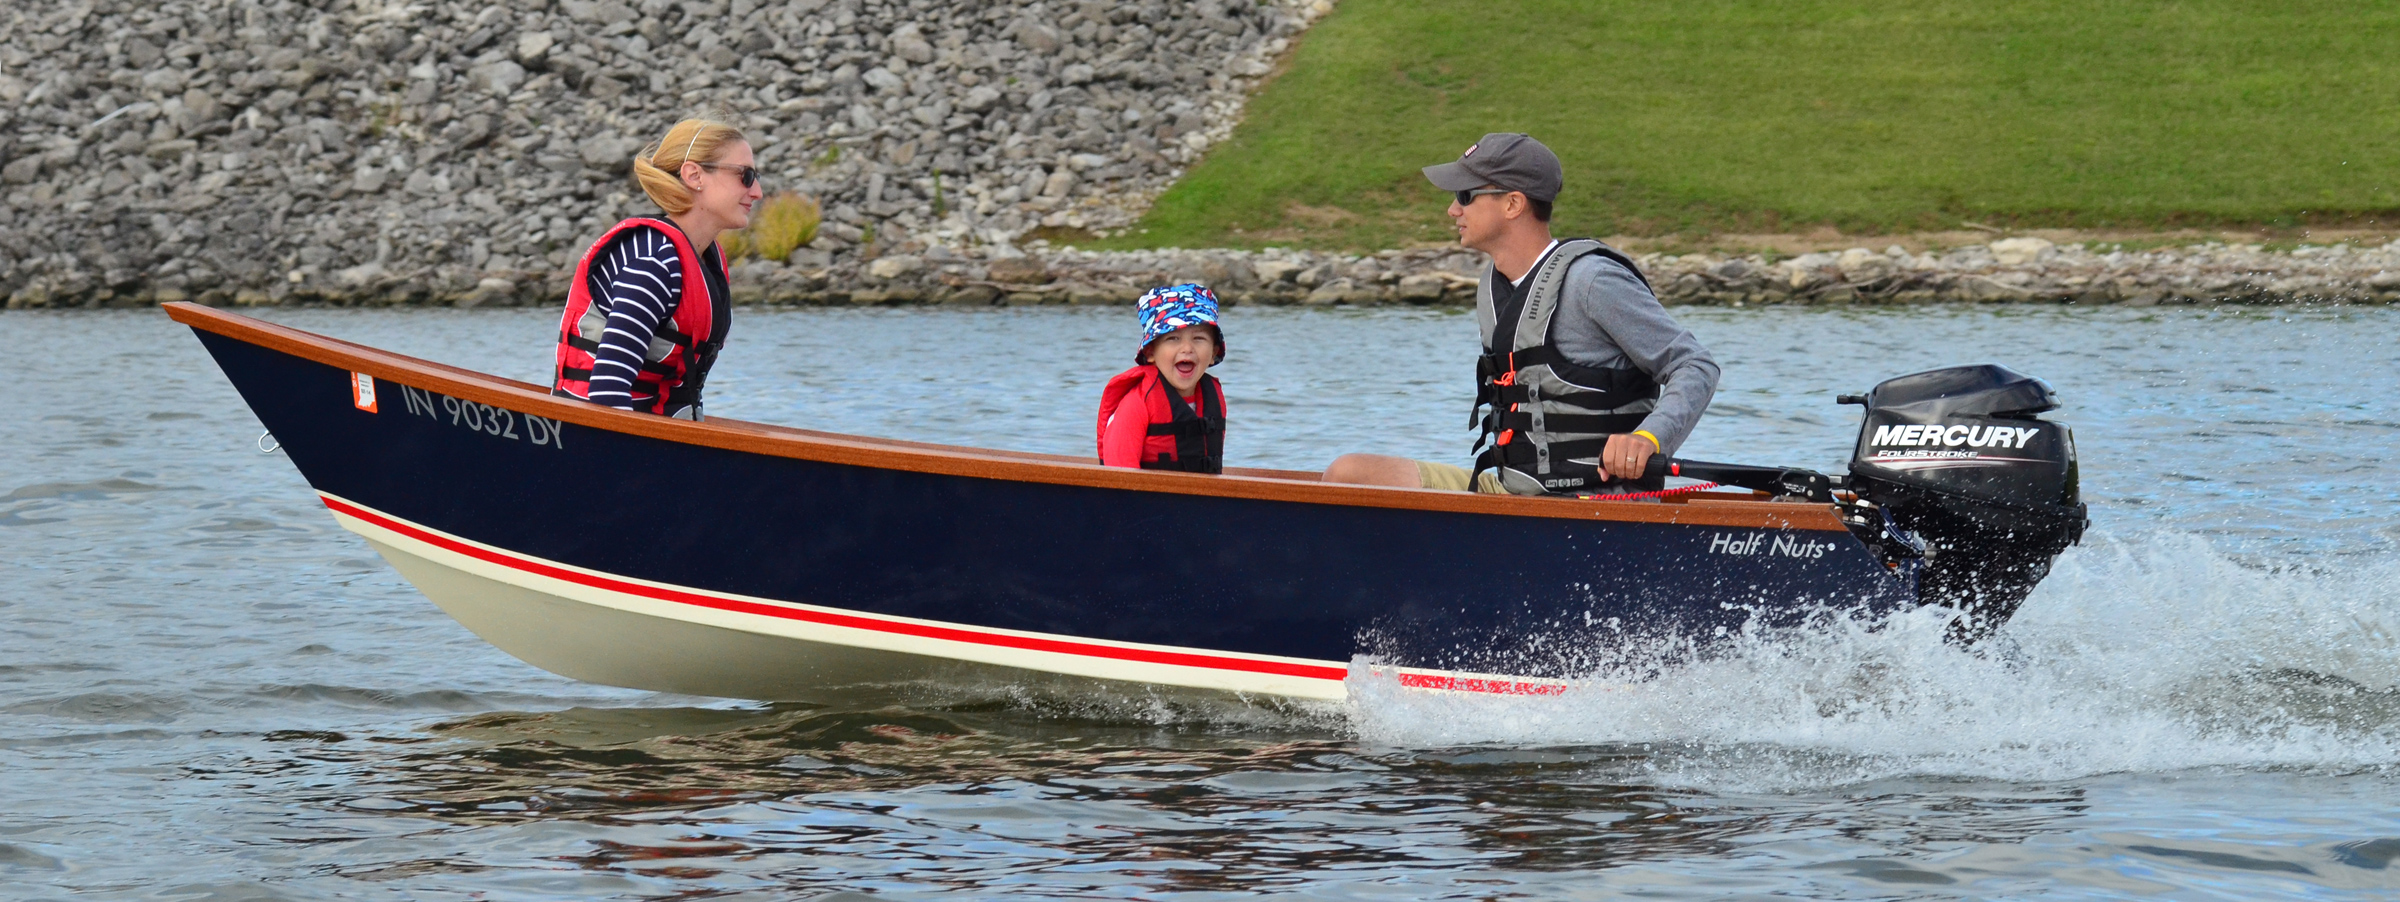 The Tango Skiff 13 fits the bill perfectly as a small